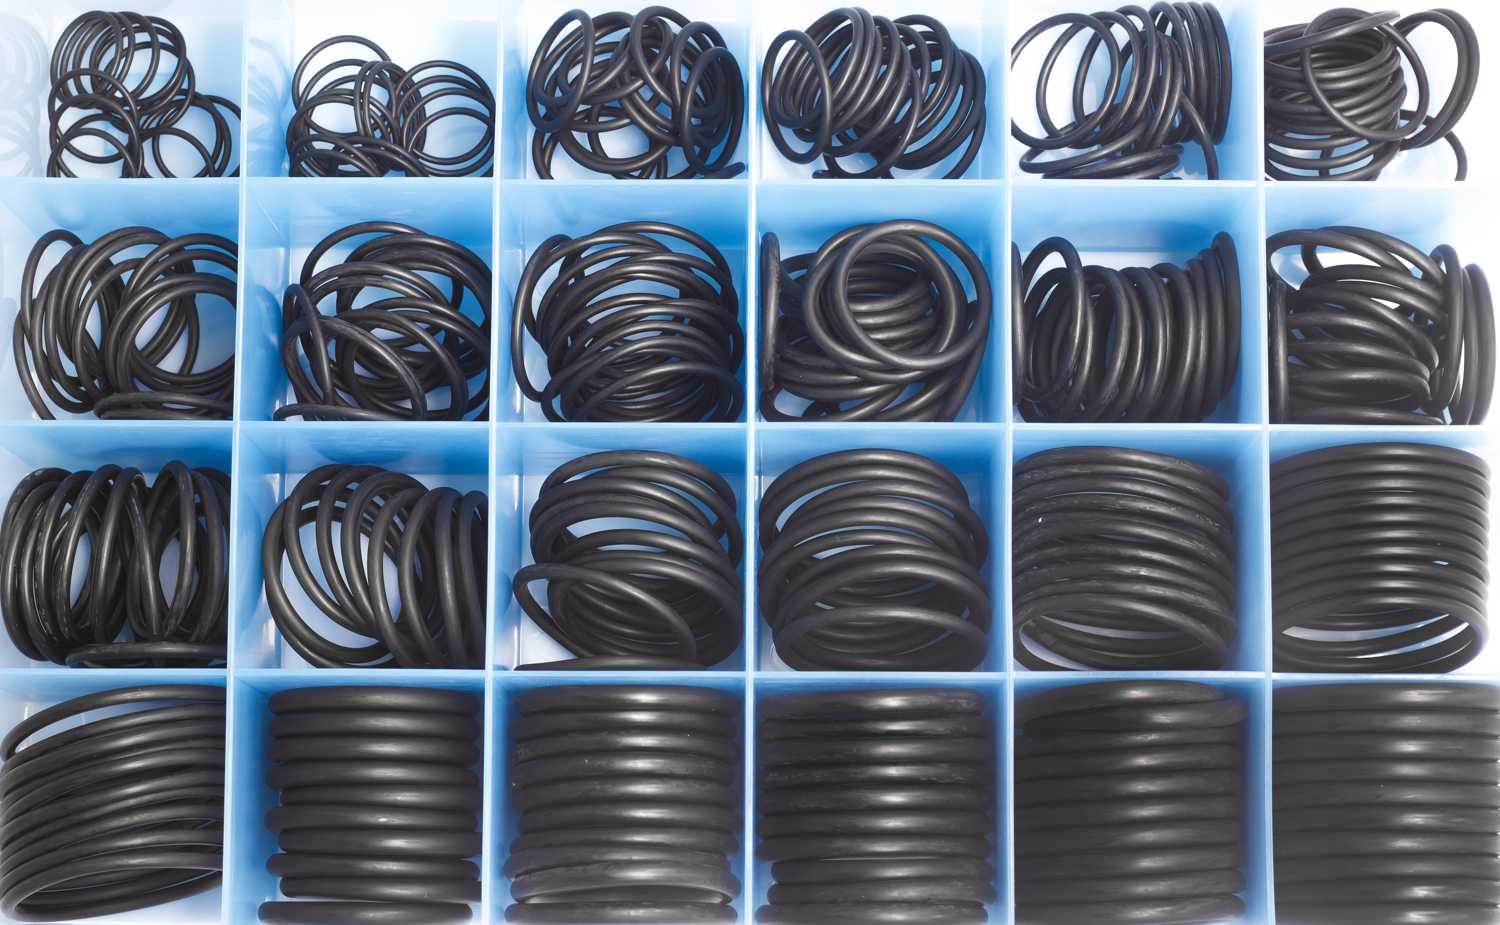 o-rings arranged for storage according to advice from Coating Systems